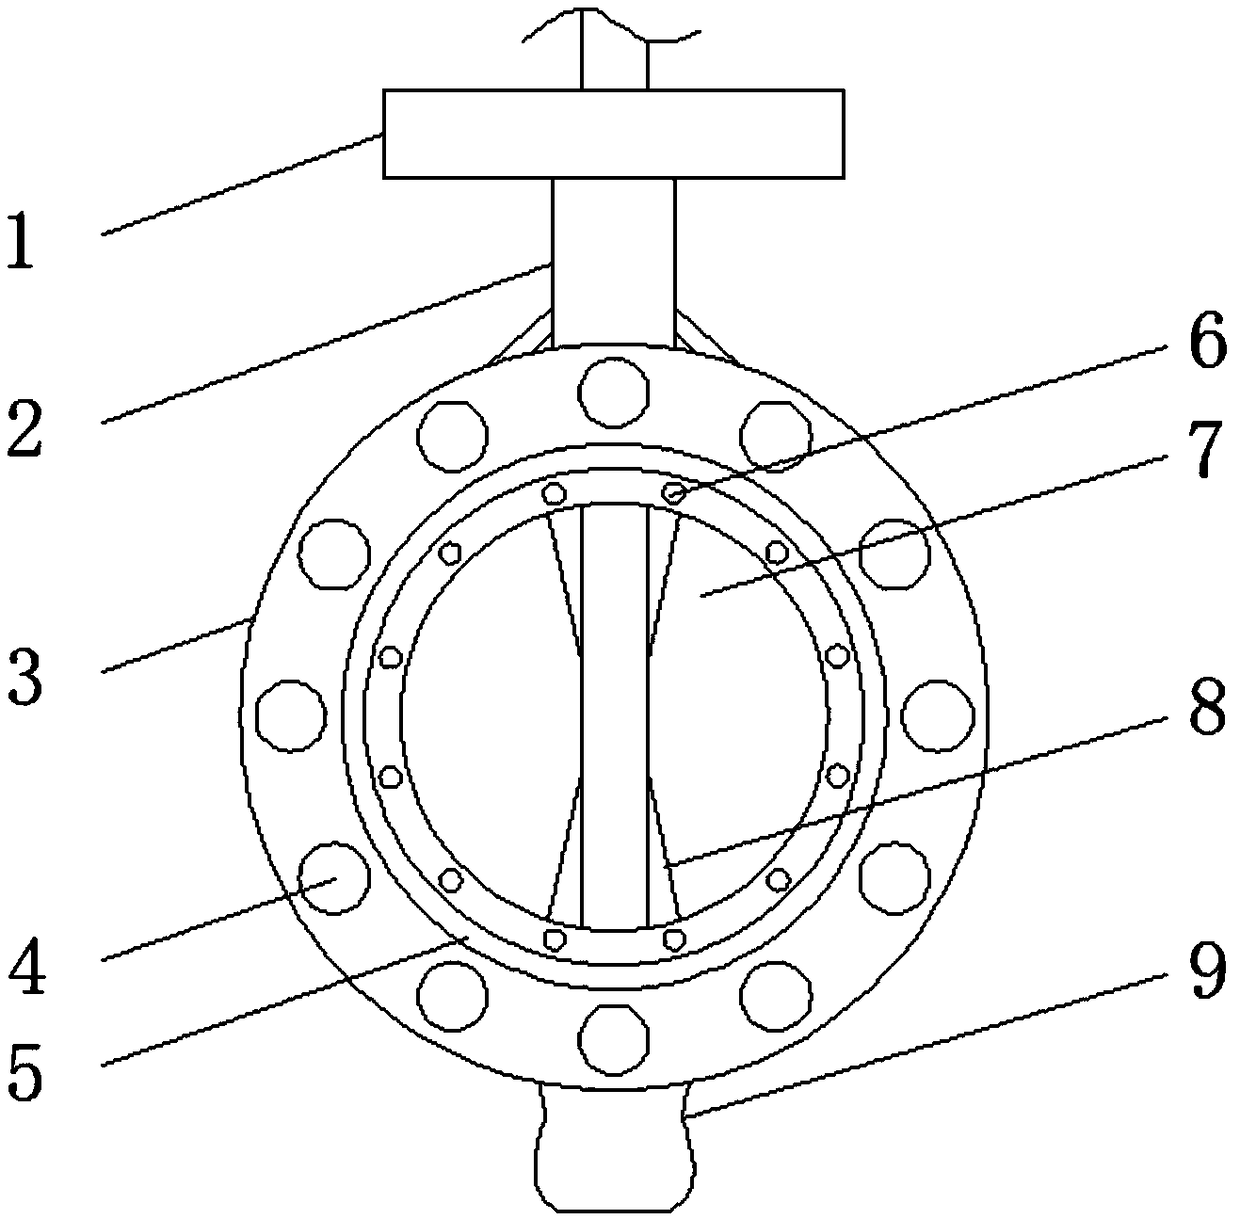 Movable butterfly valve with valve body and sealing ring